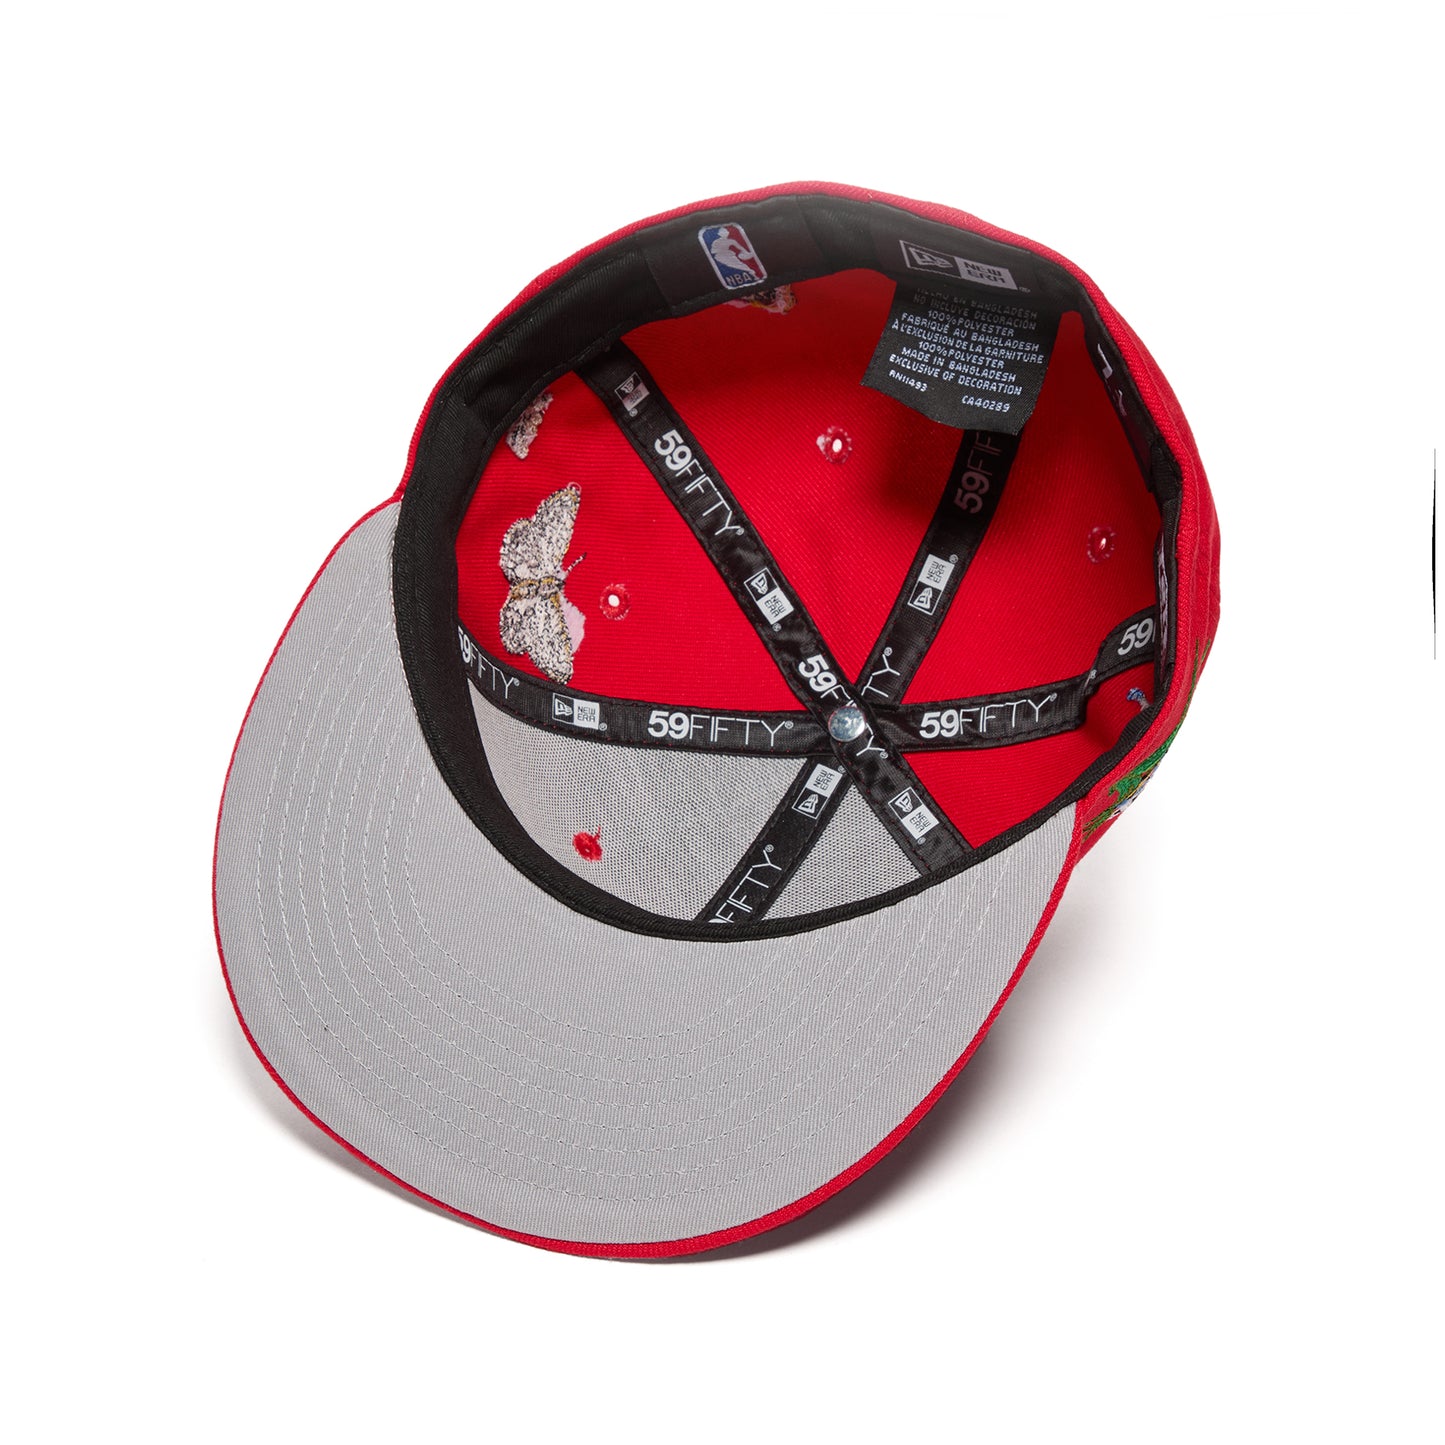 New Era x NBA Chicago Bulls Felt 59ifty Fitted Hat (Red)